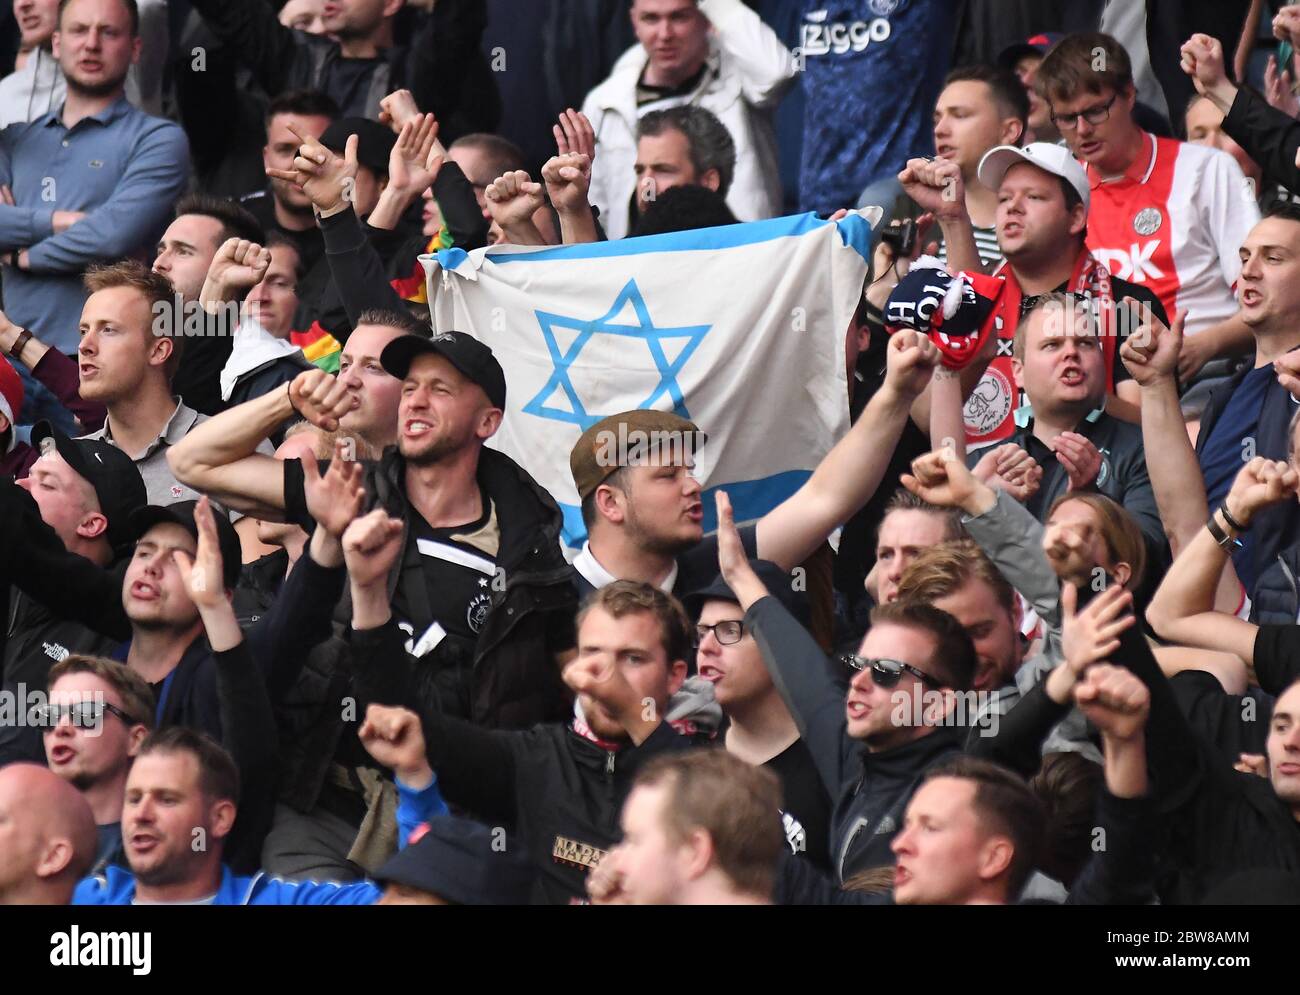 LONDON, ENGLAND - APRIL 30, 2019: Ajax fans with Israel flag pictured in the stands prior to he first leg of the 2018/19 UEFA Champions League Semi-finals game between Tottenham Hotspur (England) and AFC Ajax (Netherlands) at Tottenham Hotspur Stadium. Stock Photo